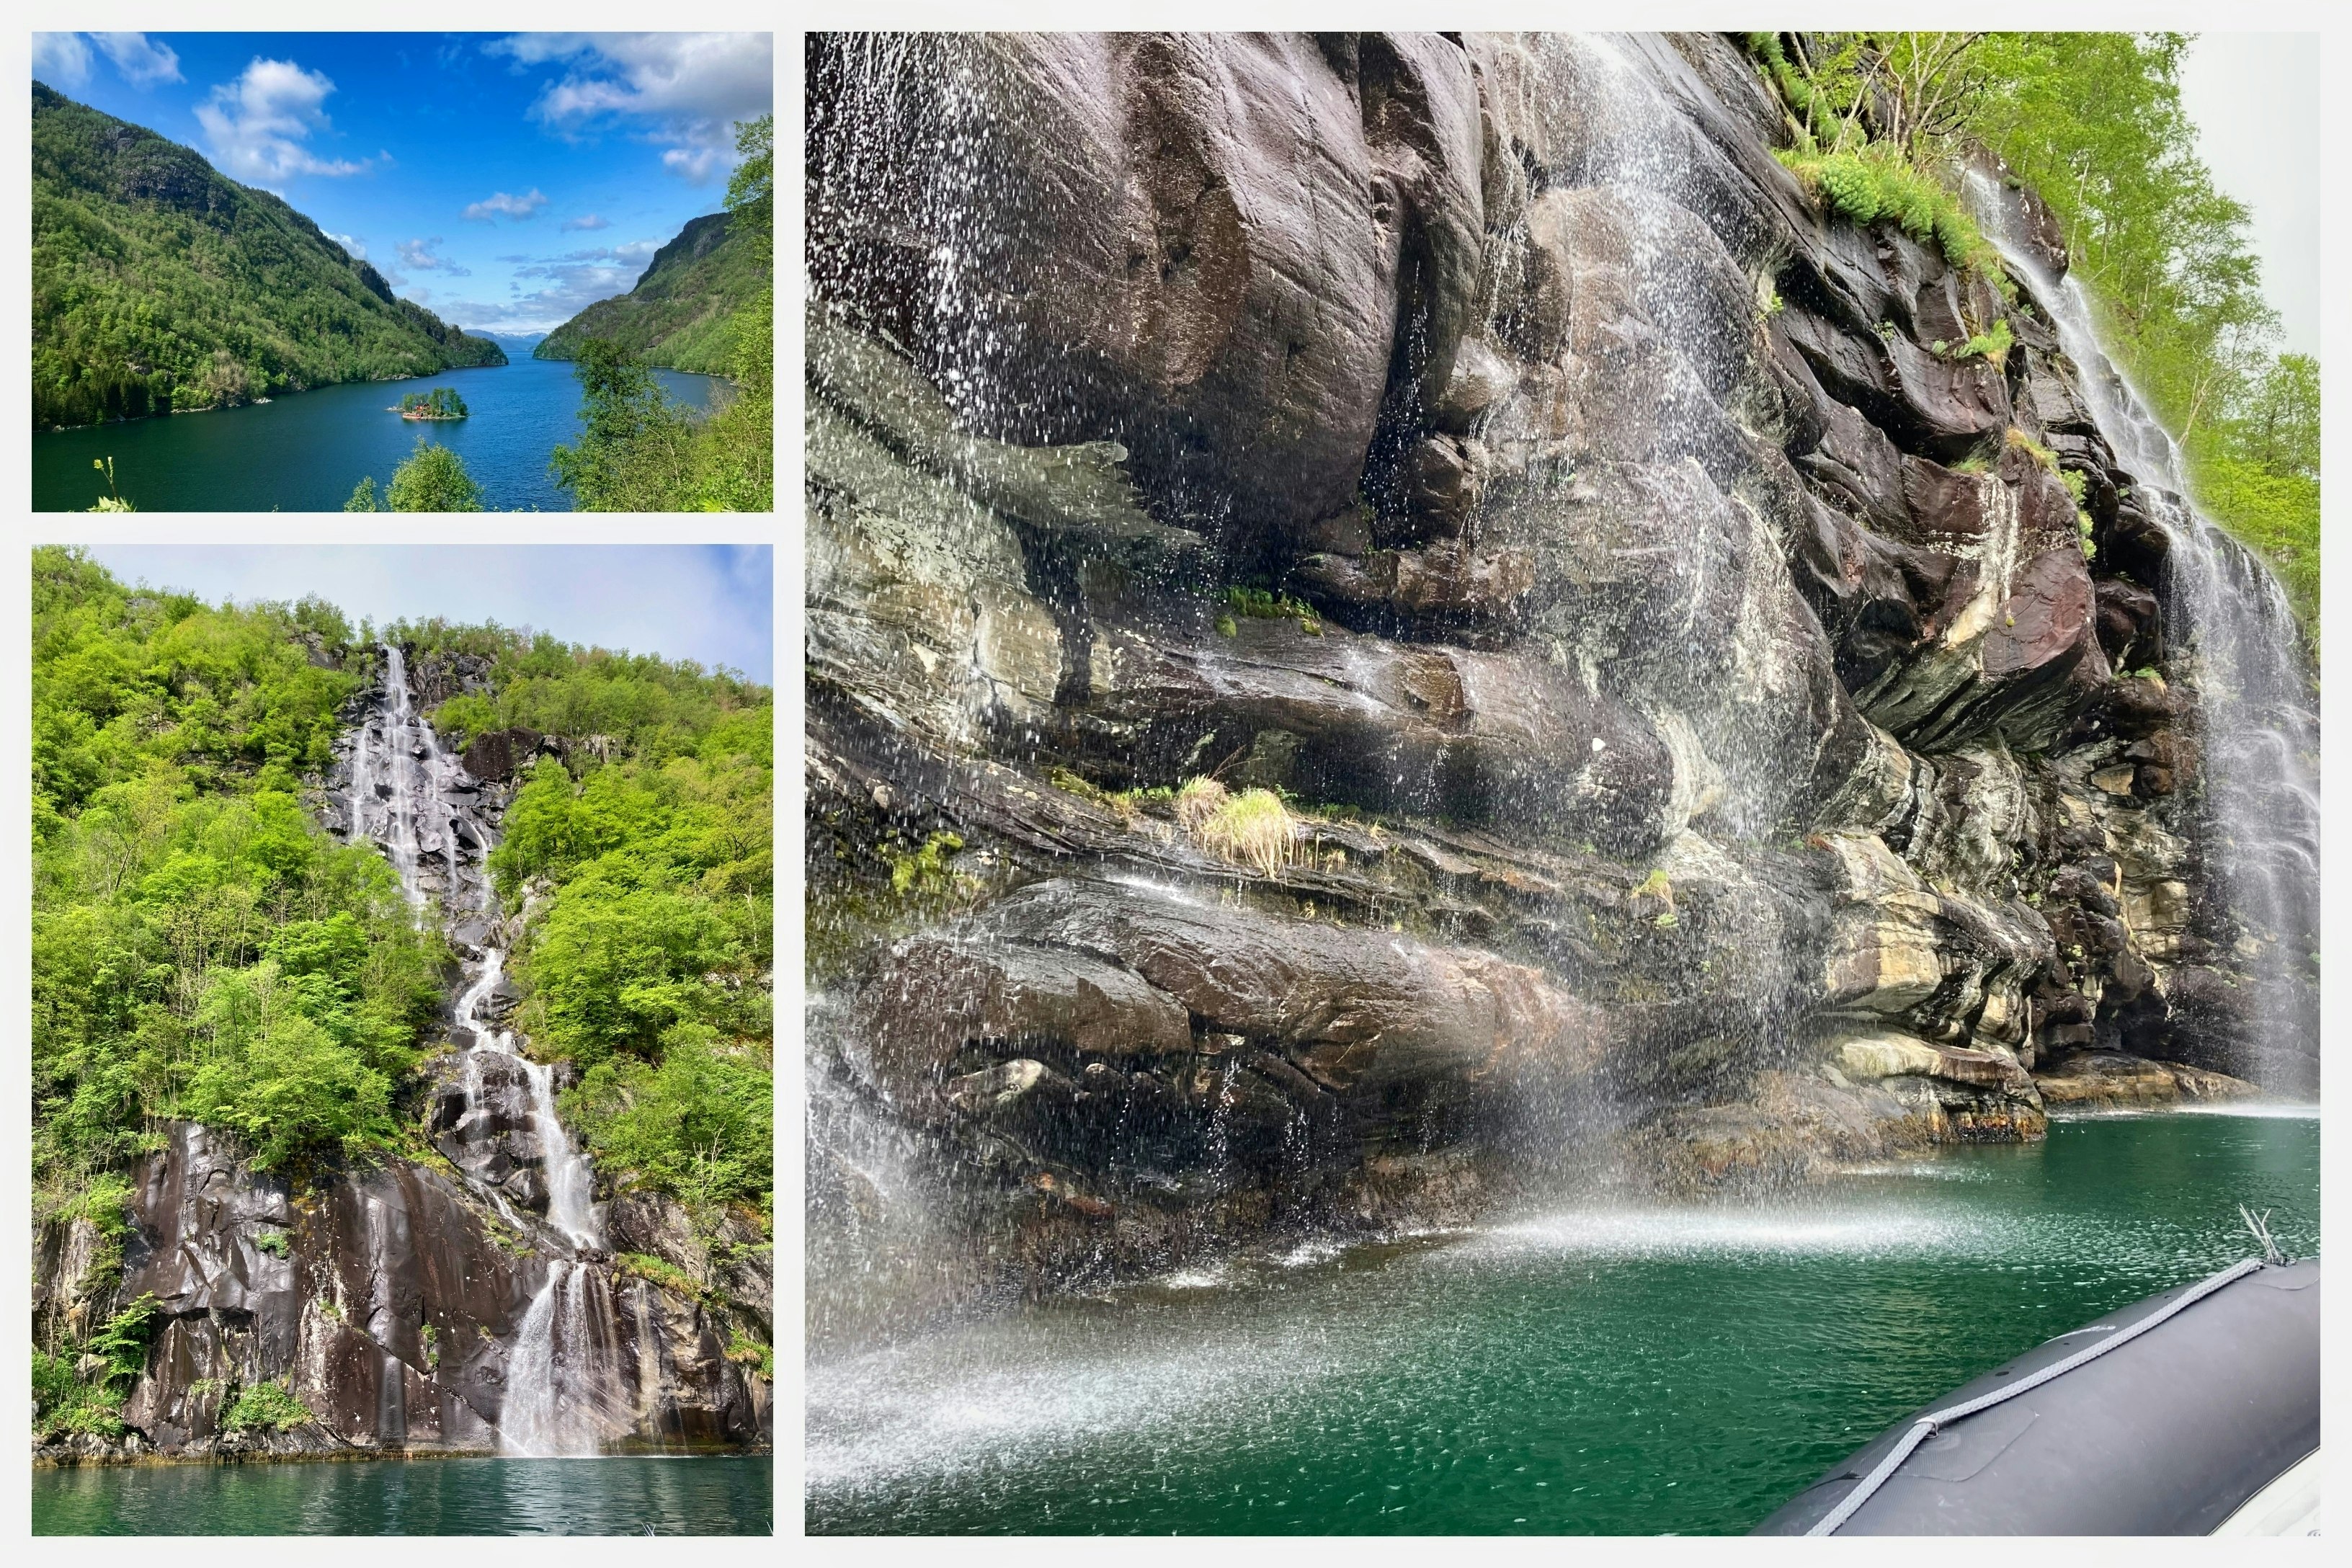 Photos of Norway's Salmon River and Hardangerfjord's waterfall up-close